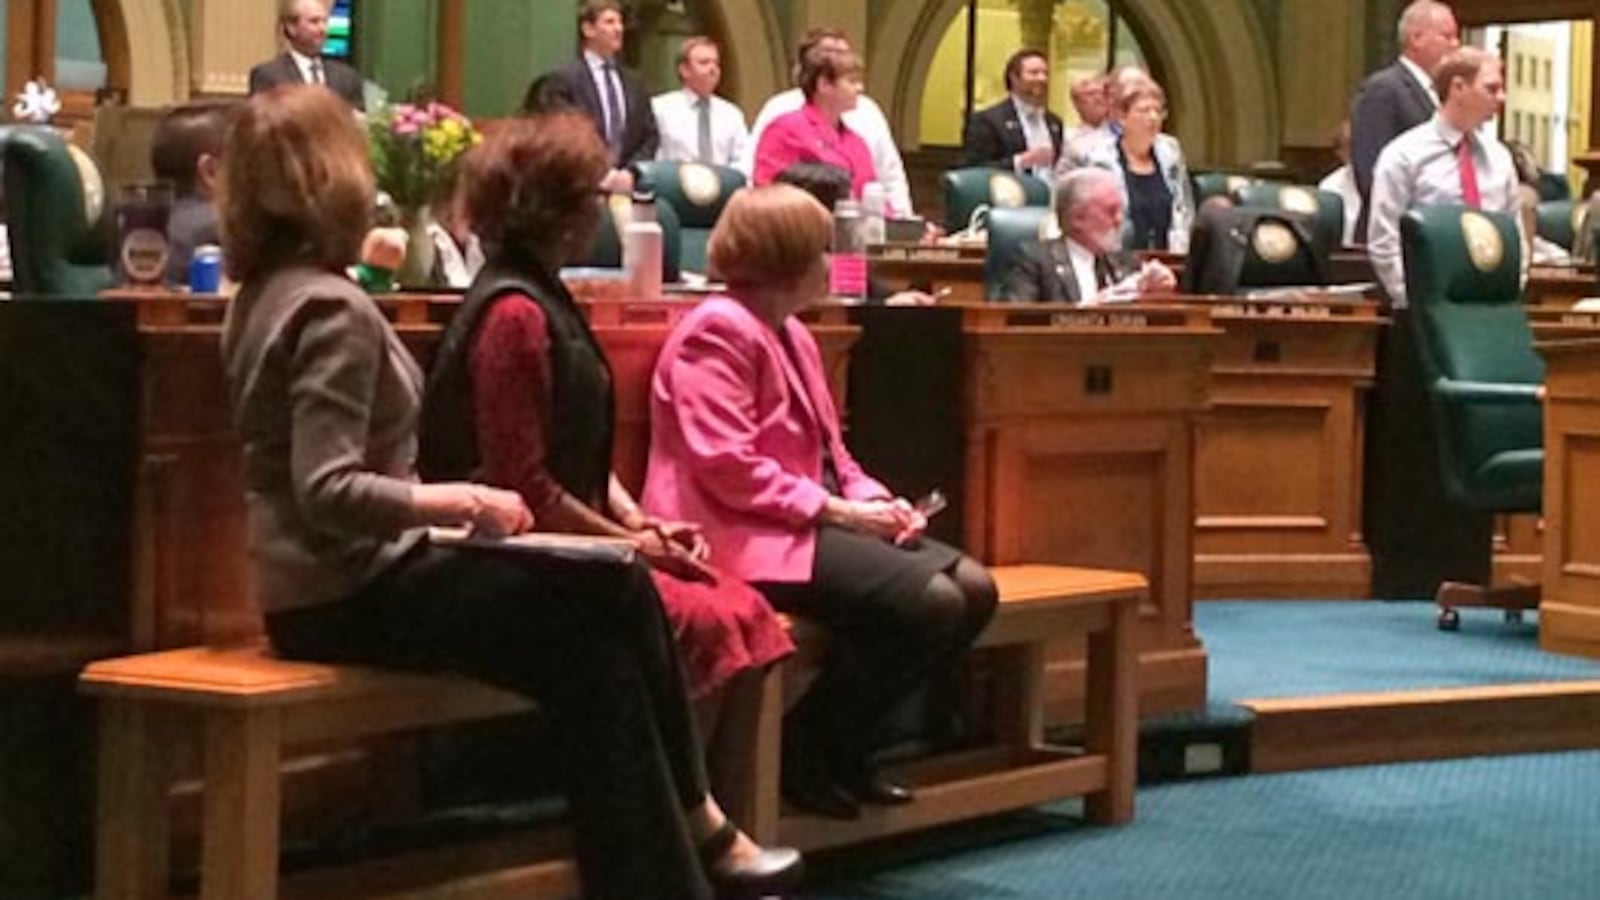 Testing bill sponsor Rep. Millie Hamner (left) watches as House takes a standing vote on an amendment.